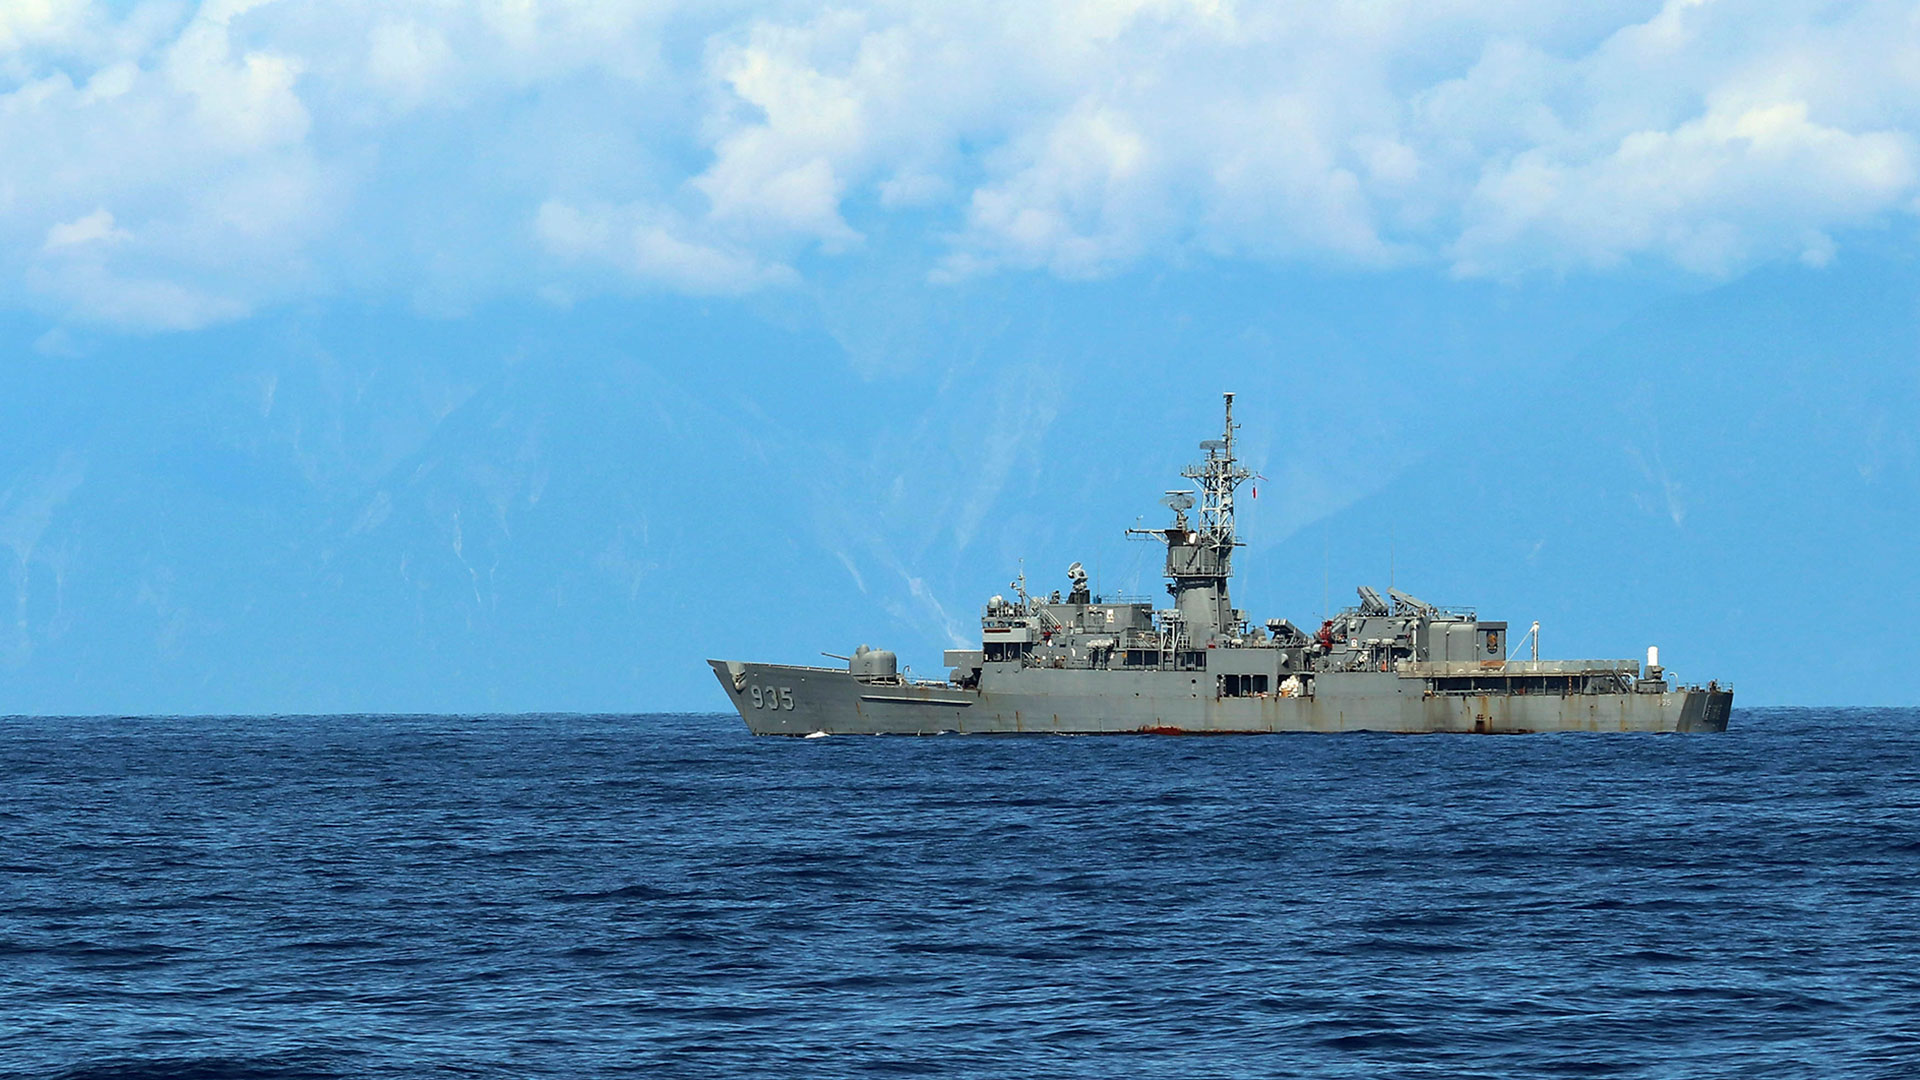 In this photo released by China's Xinhua News Agency, a Taiwanese navy warship Lan Yang is seen from the deck of a Chinese warship during a military exercise on Friday, Aug. 5, 2022 (Lin Jian/Xinhua via AP).